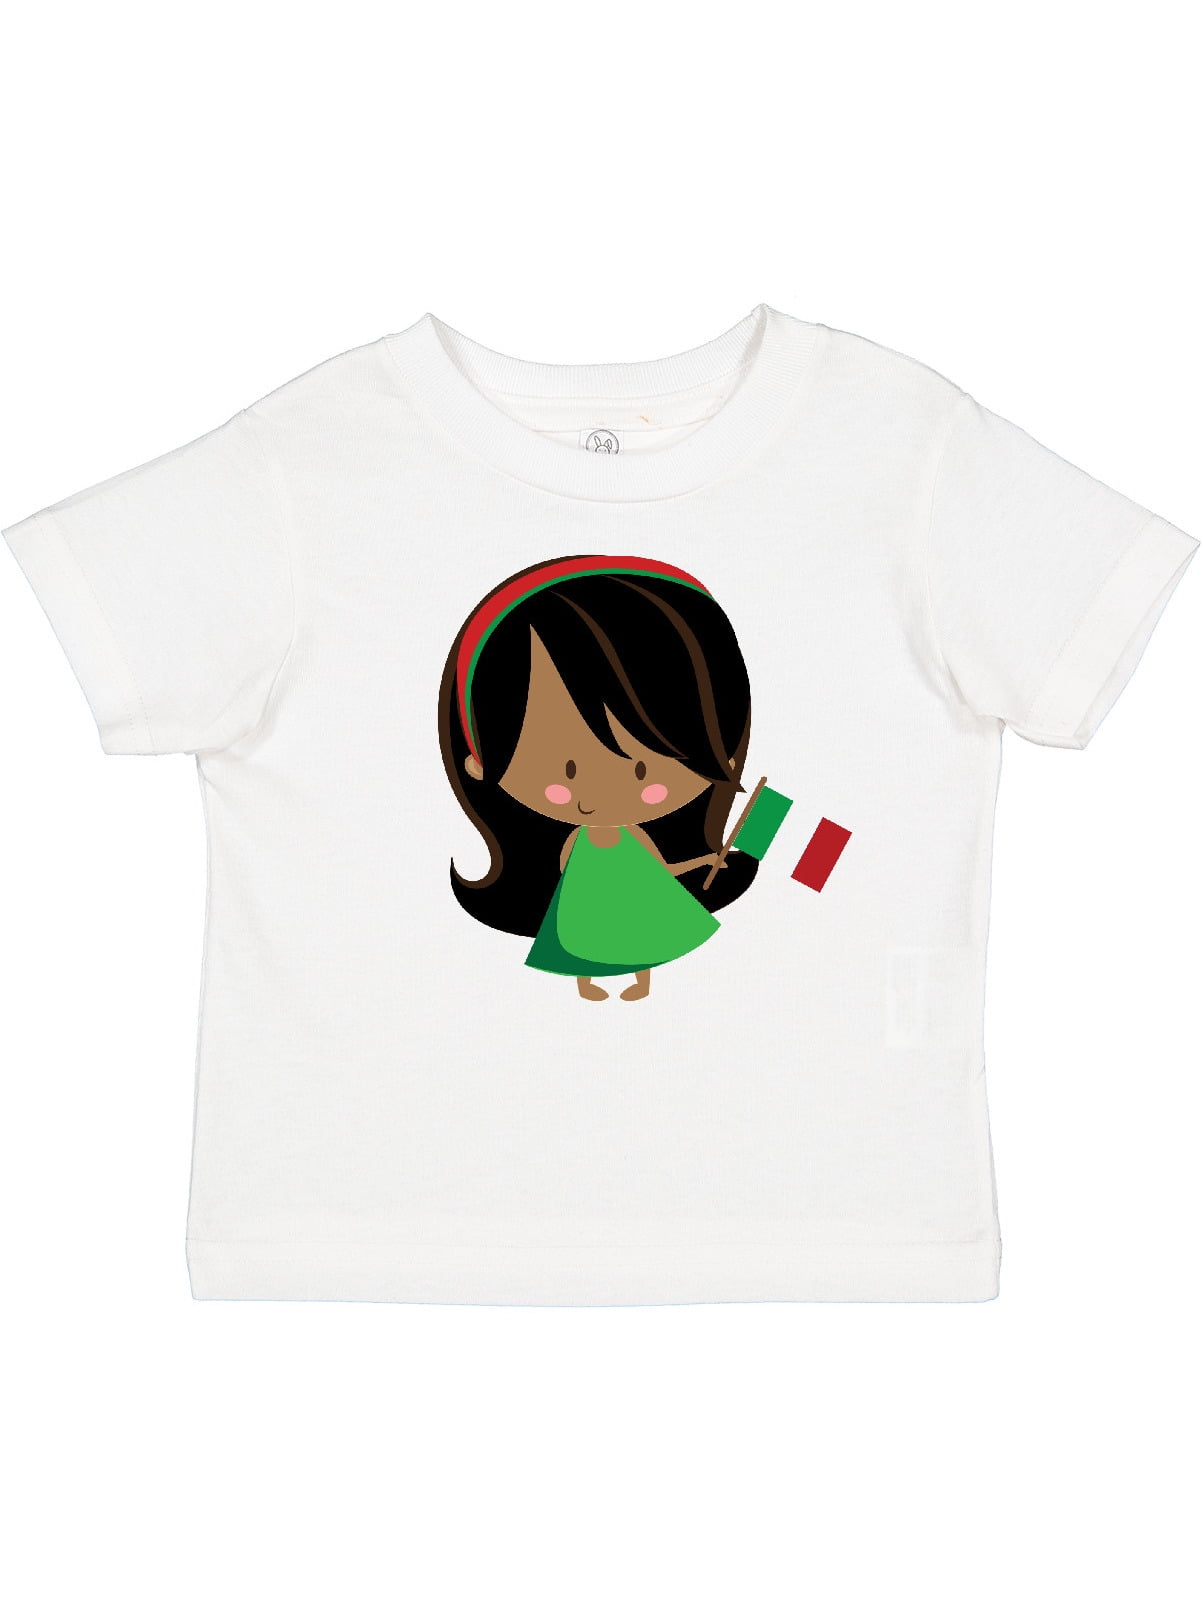 2-6 Years Old Kcloer24 Mexico Flag Kids Baby Boy Cute T-Shirt Summer Clothes